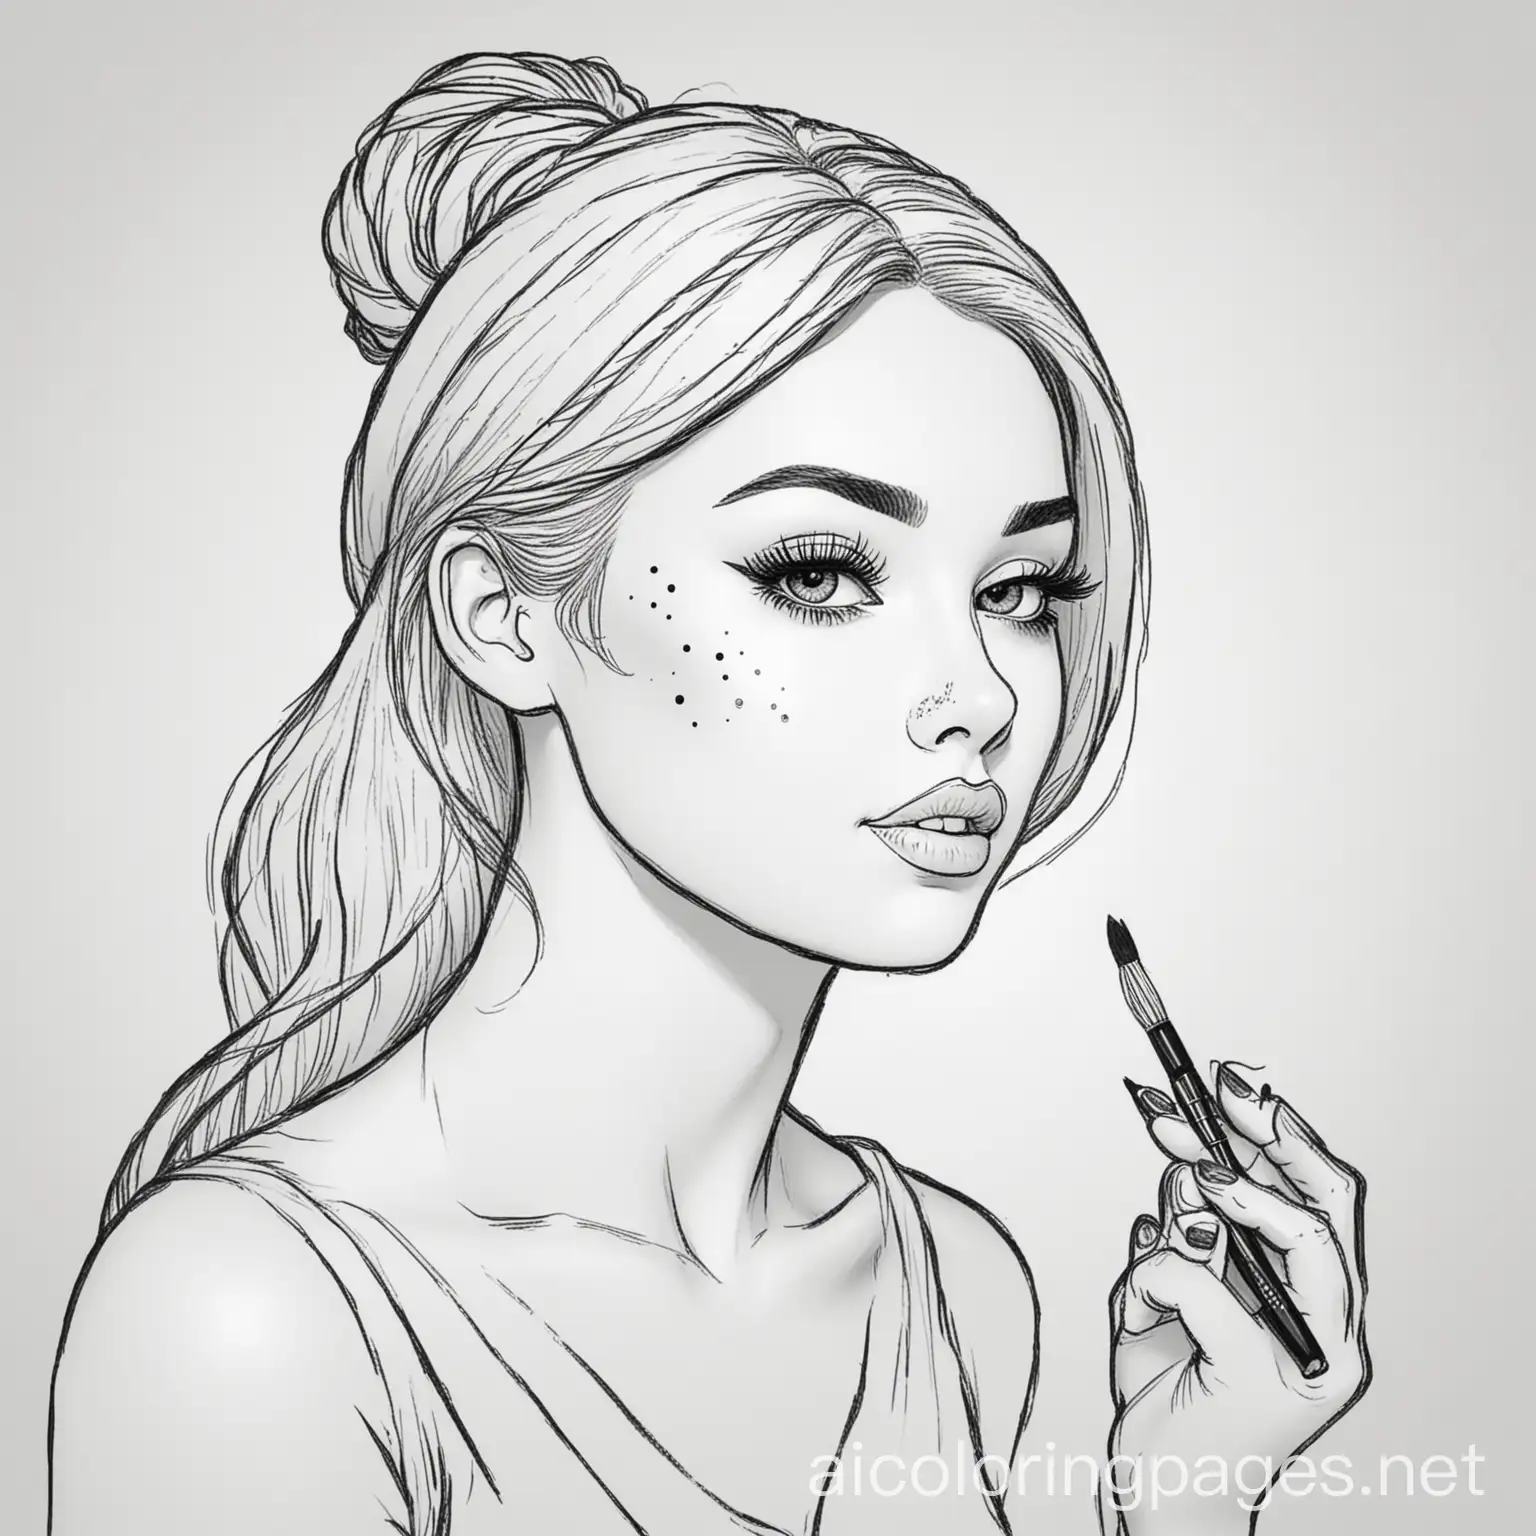 woman doing makeup, Coloring Page, black and white, line art, white background, Simplicity, Ample White Space. The background of the coloring page is plain white to make it easy for young children to color within the lines. The outlines of all the subjects are easy to distinguish, making it simple for kids to color without too much difficulty